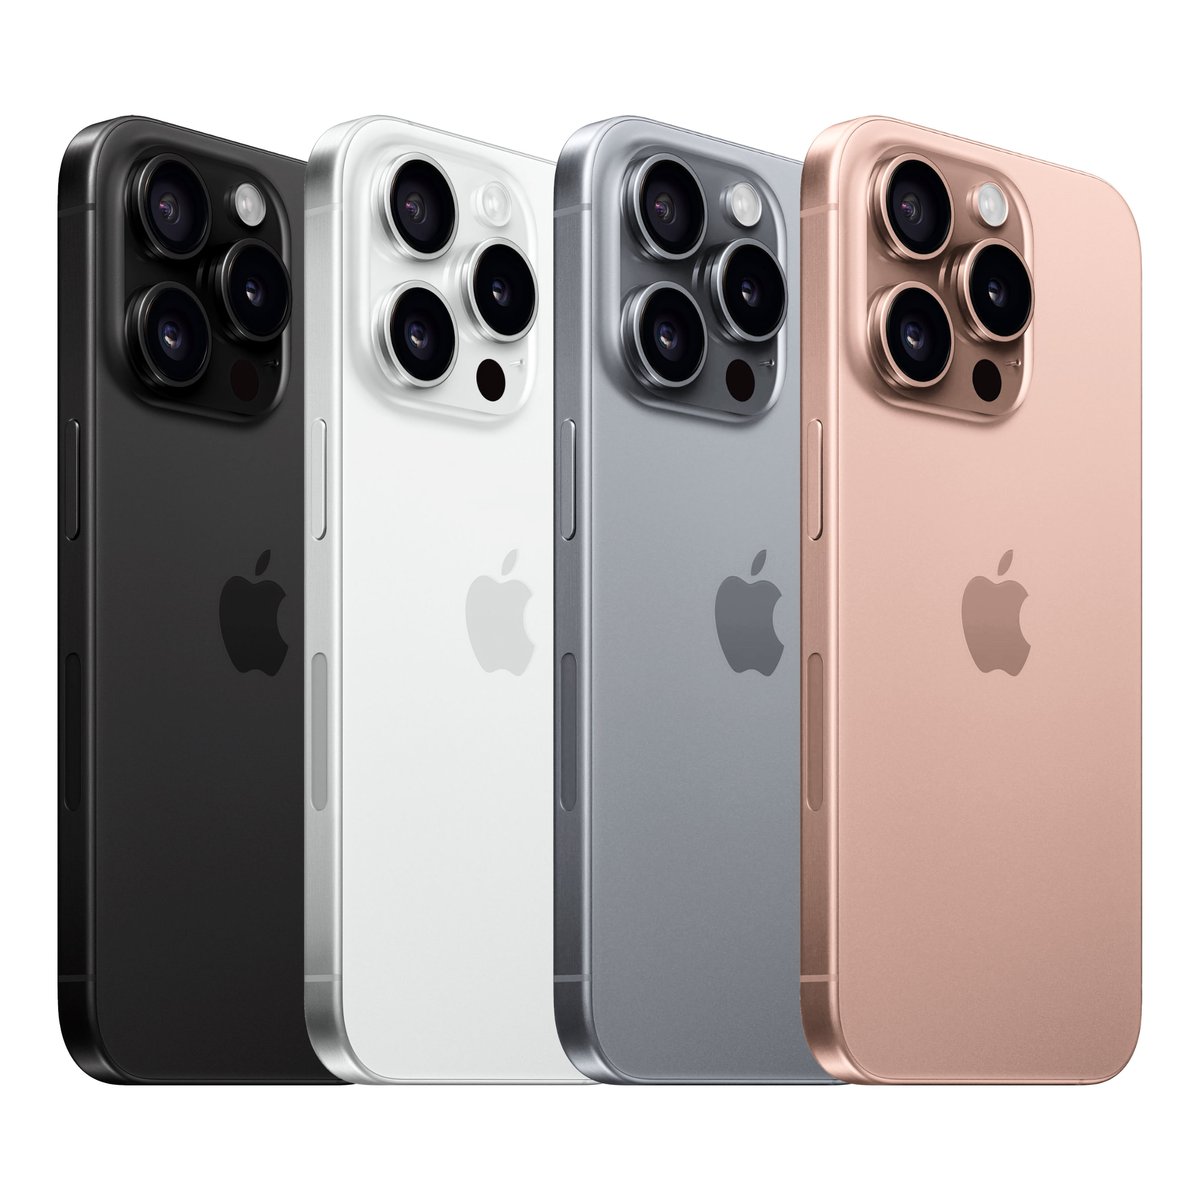 The iPhone 16 Pro models once again rumored to come in these four colors: - Black - White (or Silver) - Gray (or Natural Titanium) - Rose Source: @mingchikuo